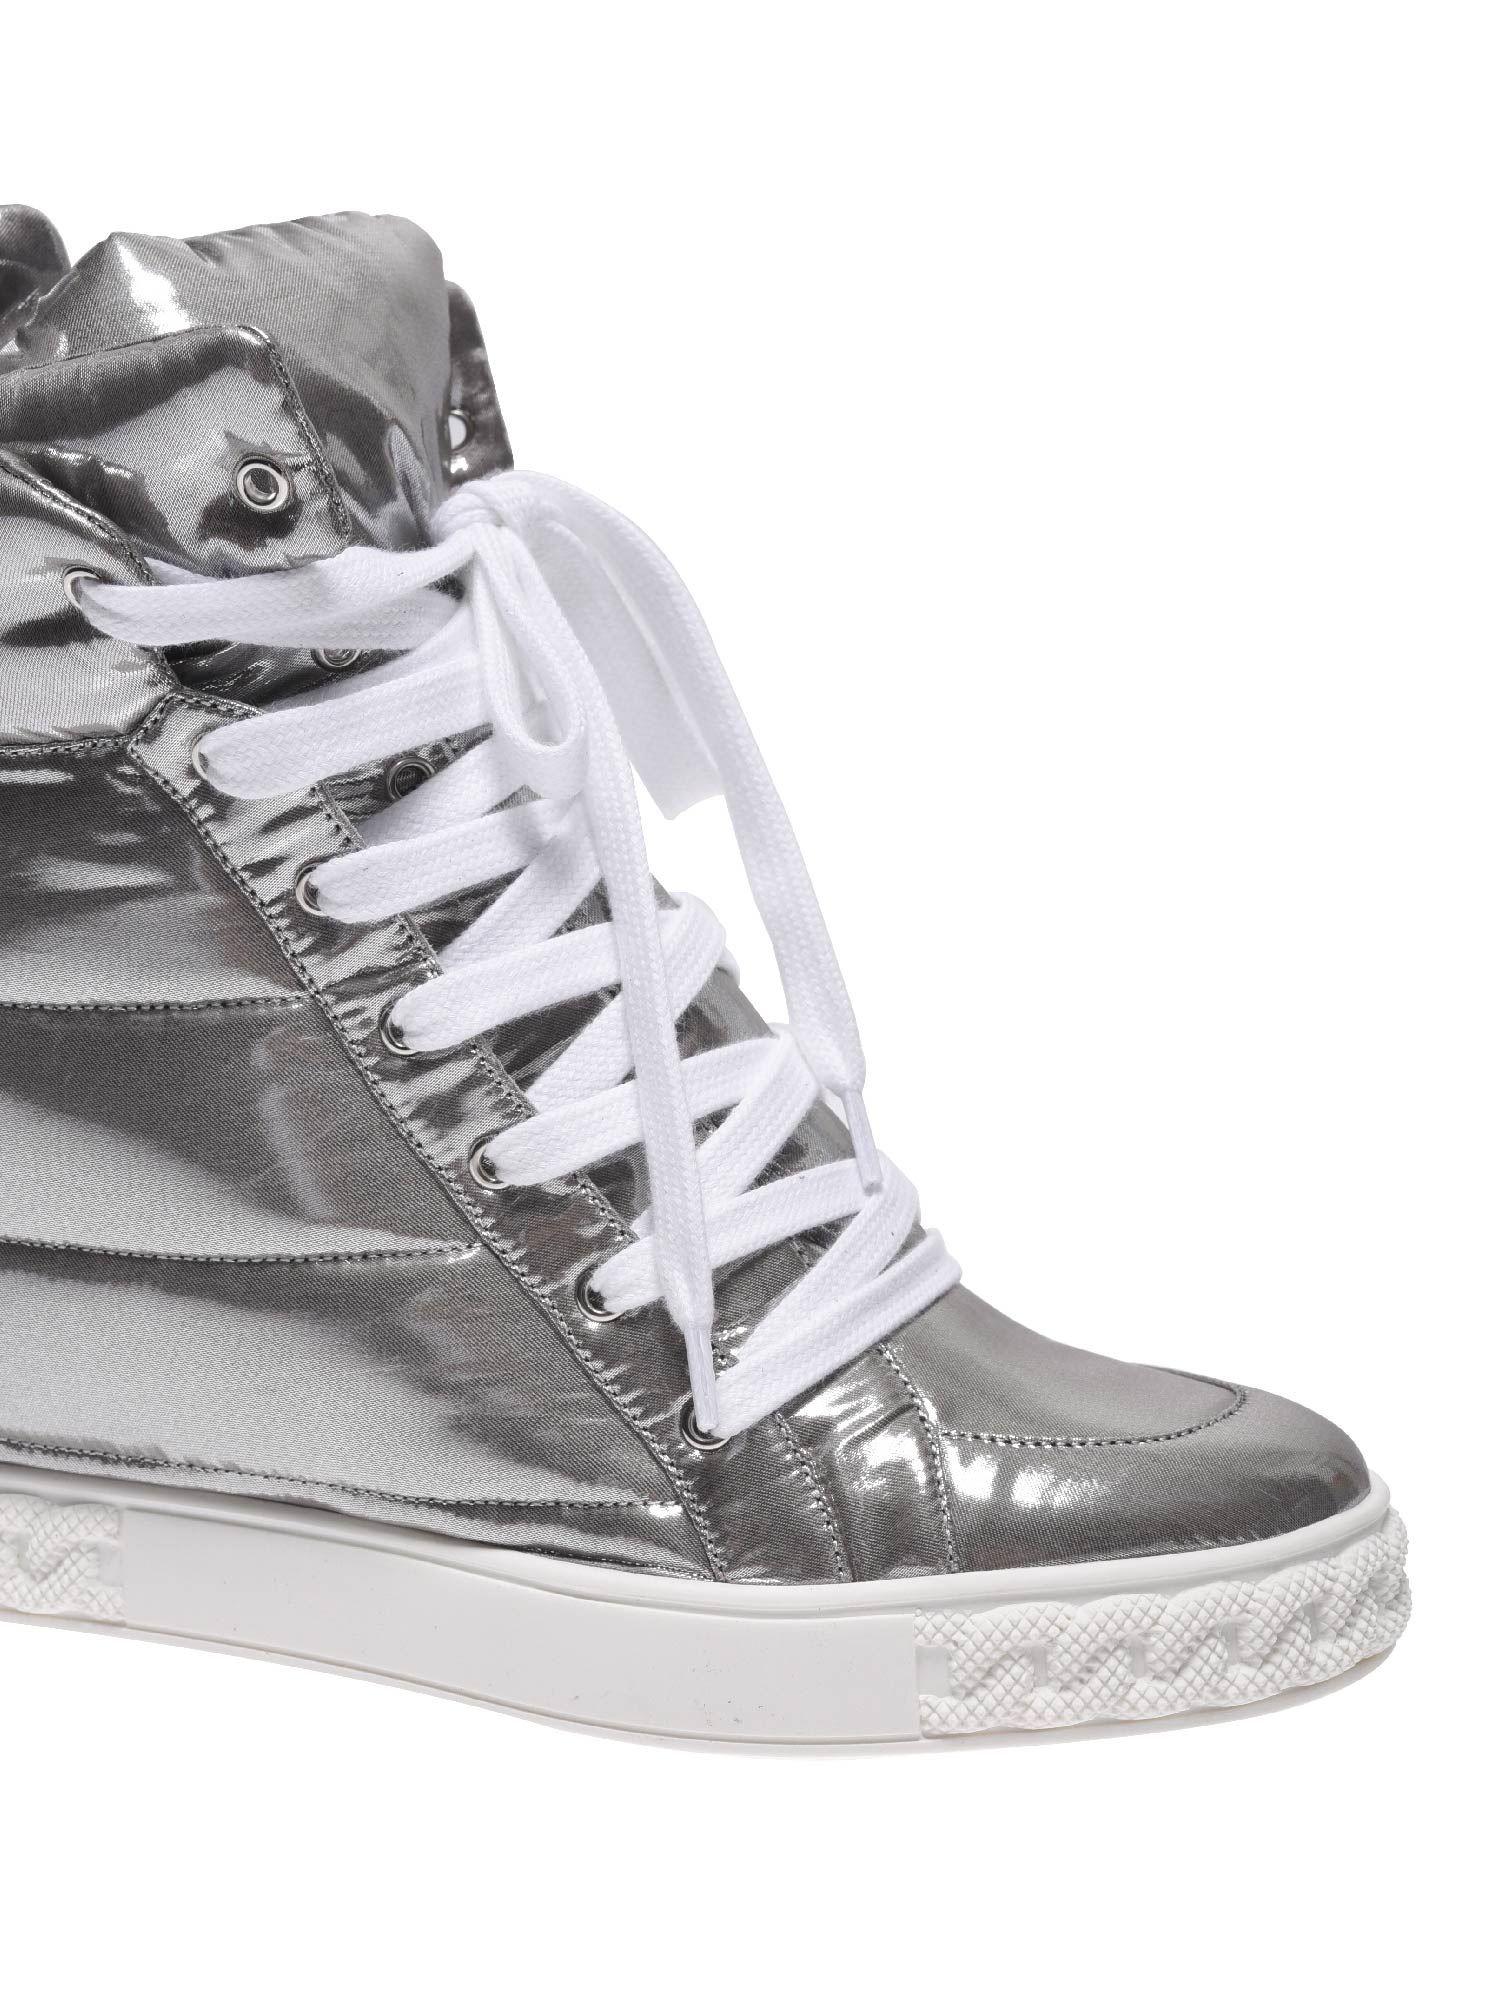 Casadei Leather Silver Sneaker With Inner Wedge in Metallic - Lyst